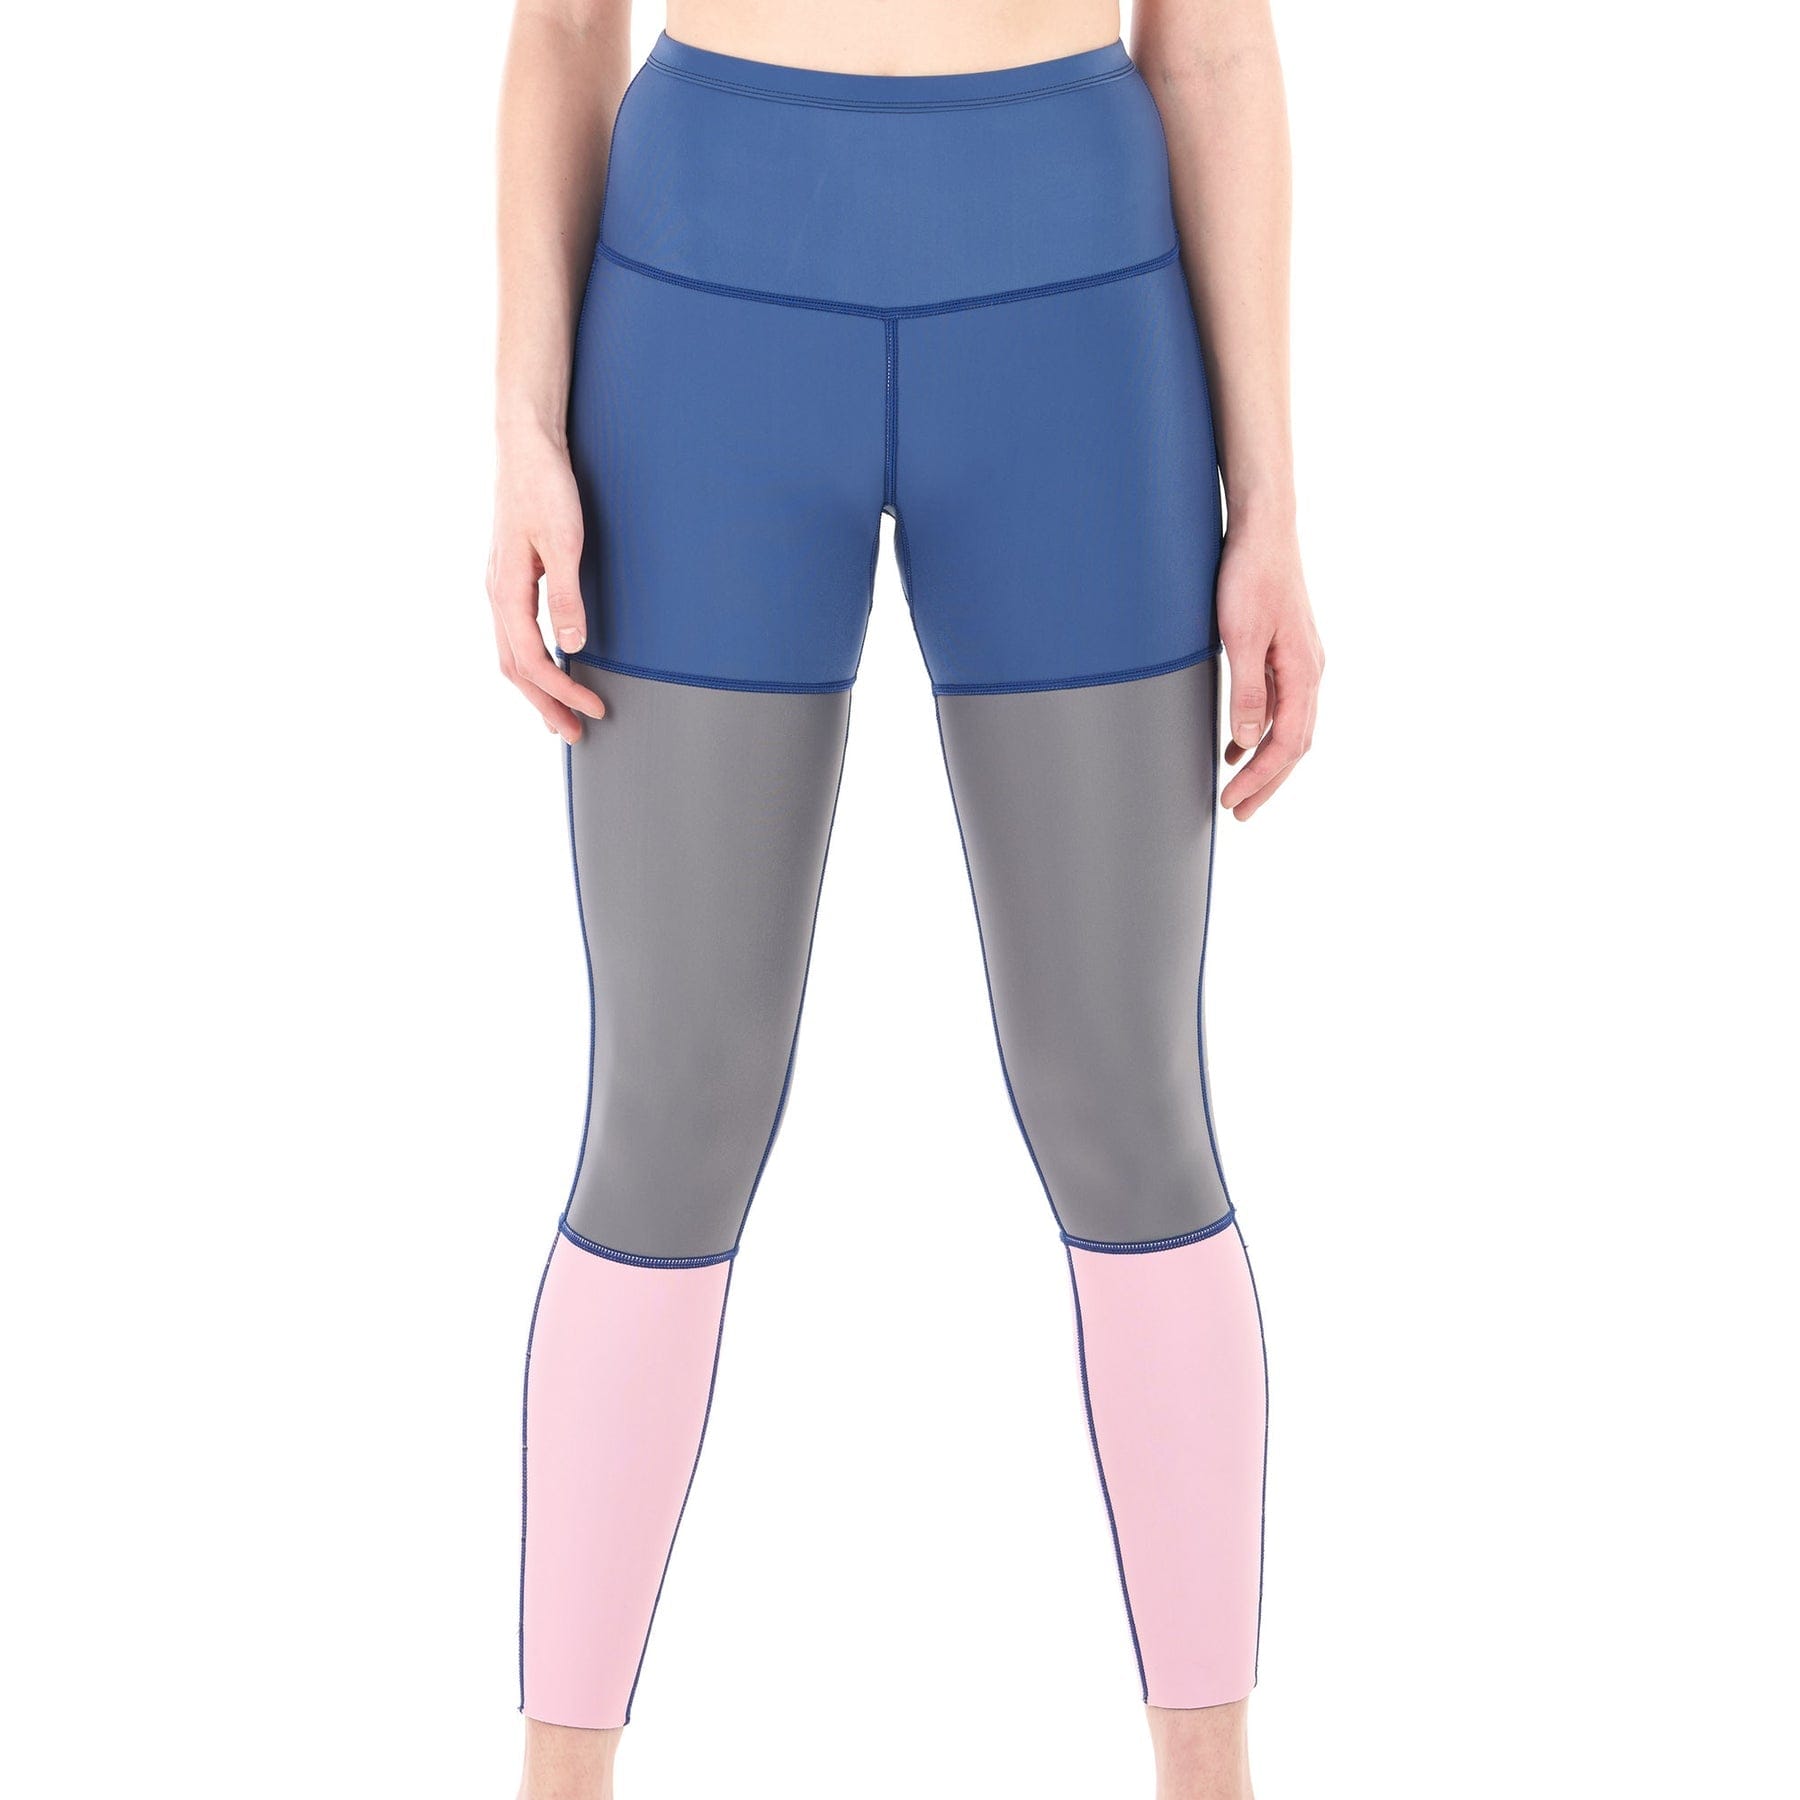 Women's Active Ombre Leggings (4 Colors, Only Small and Medium